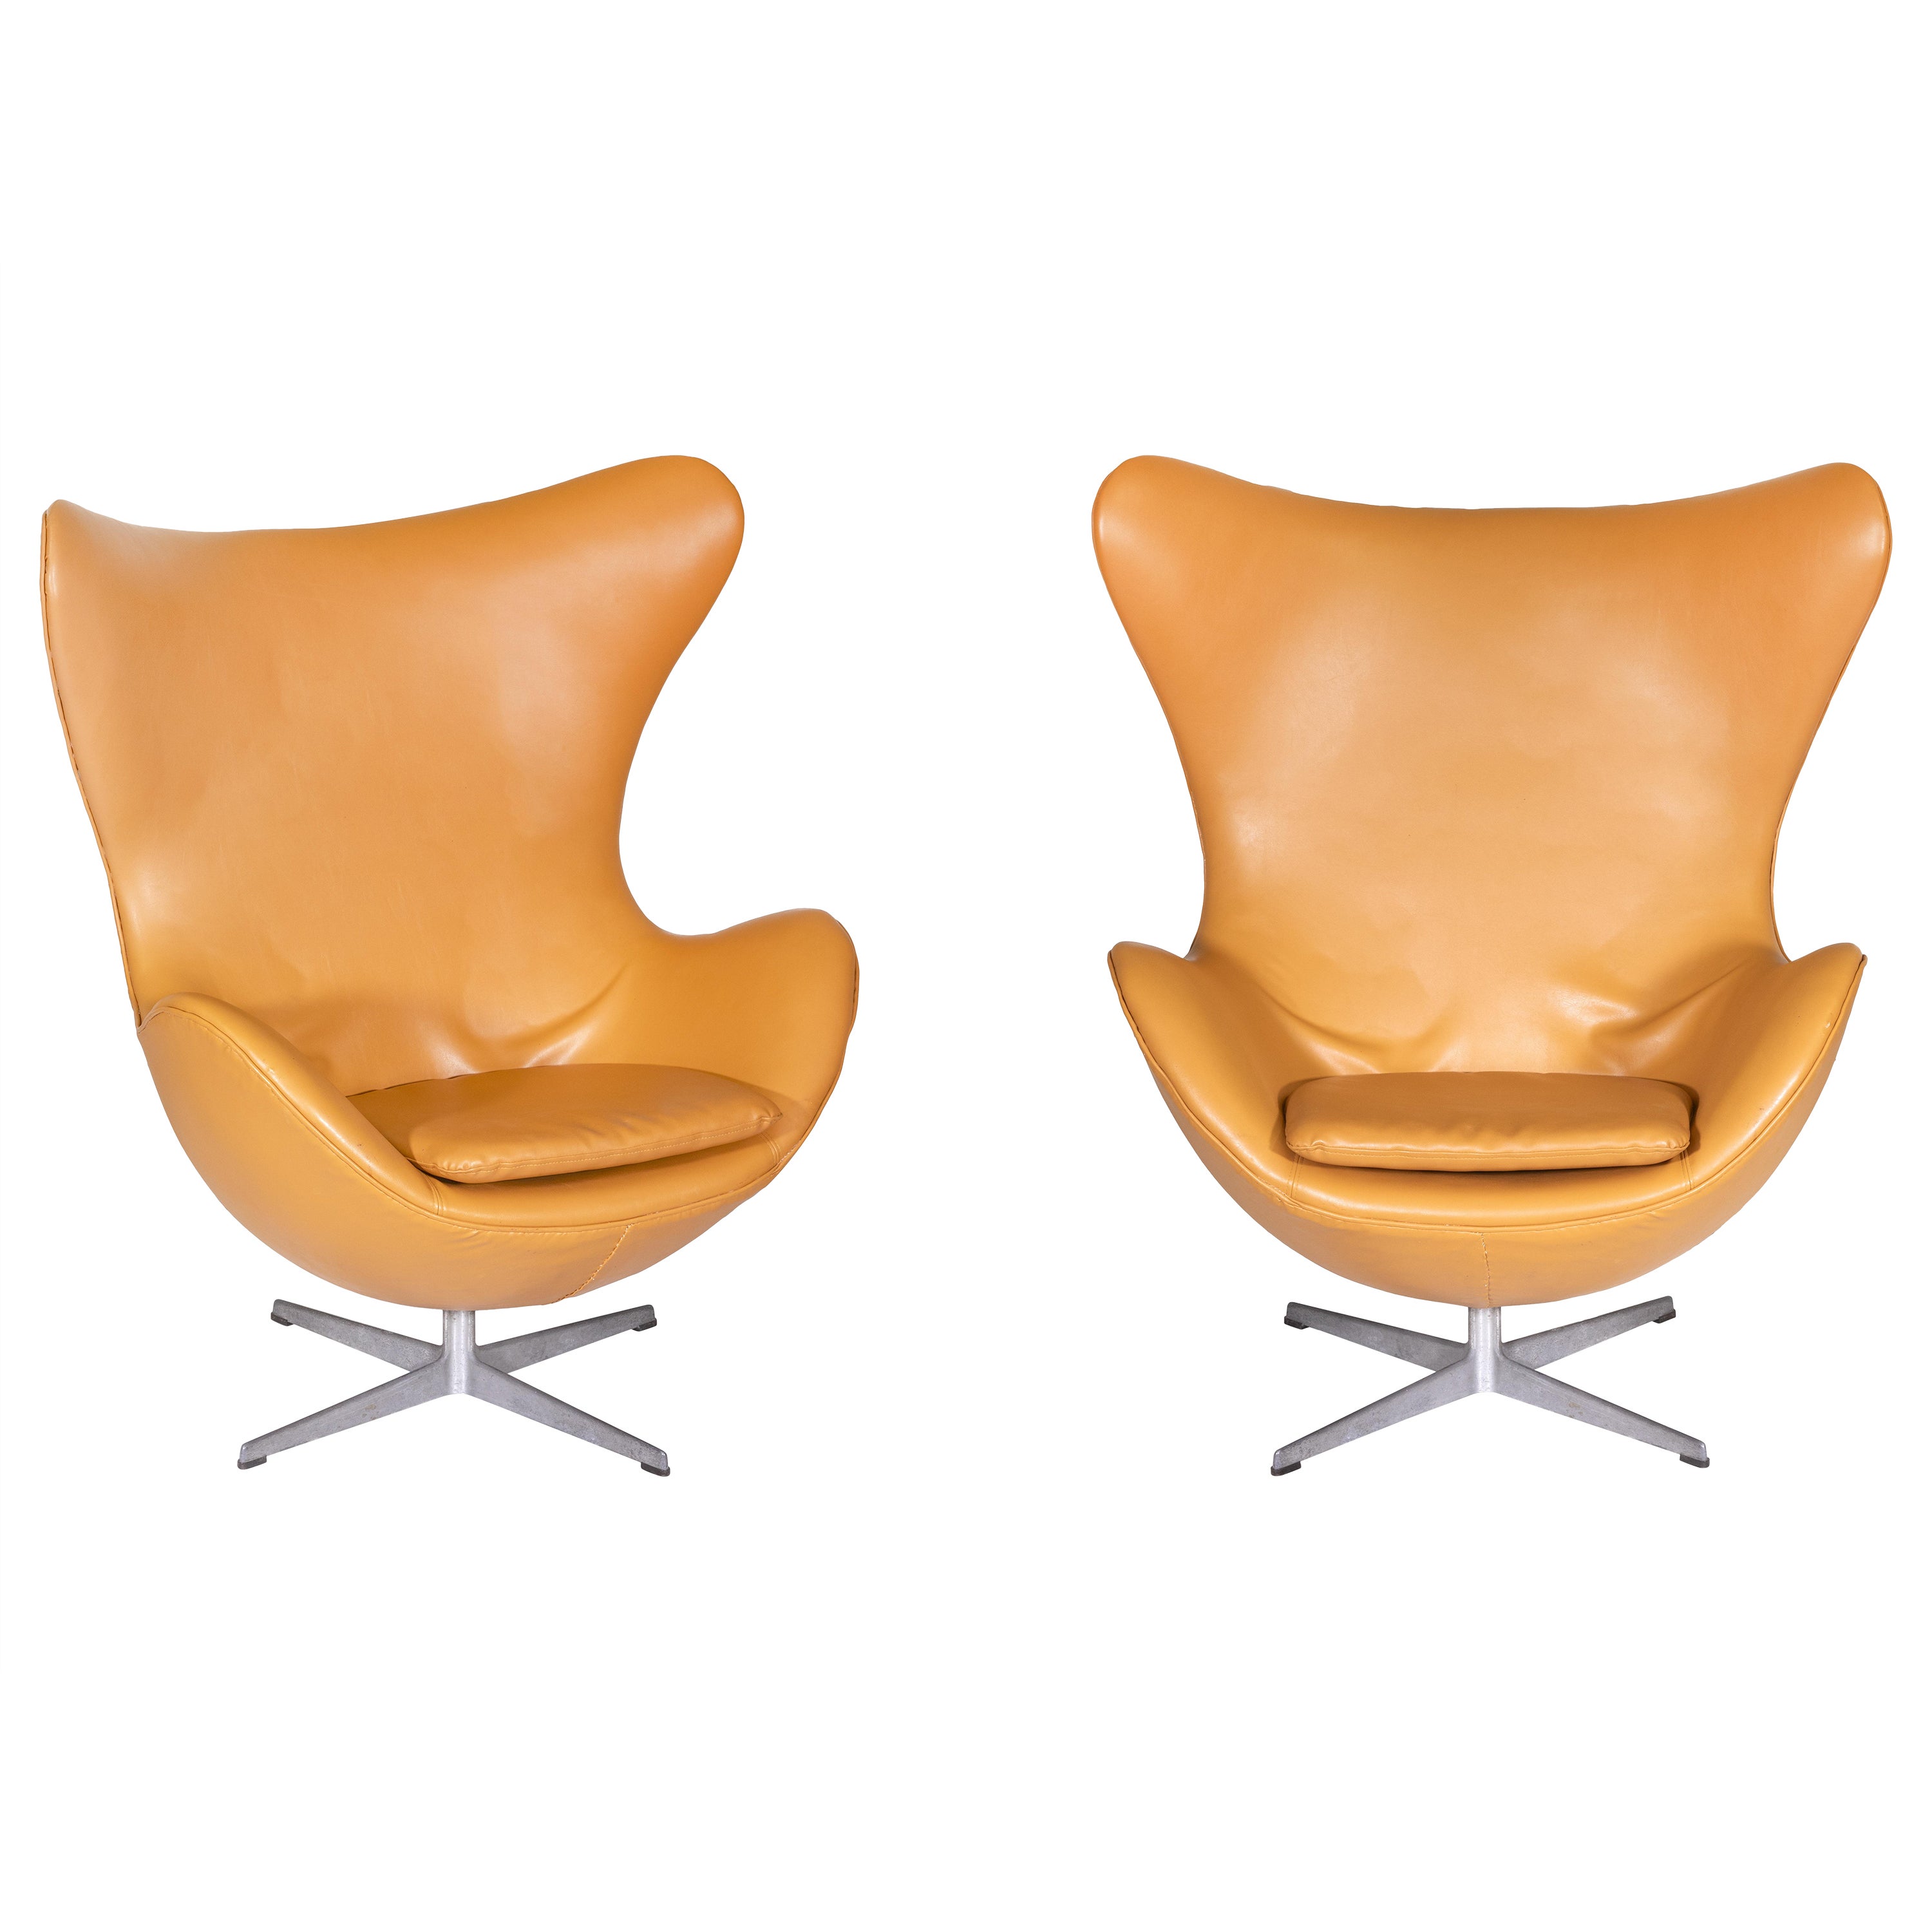 Pair of Vintage Leather "EGG" Lounge Chairs by Fritz Hansen For Sale